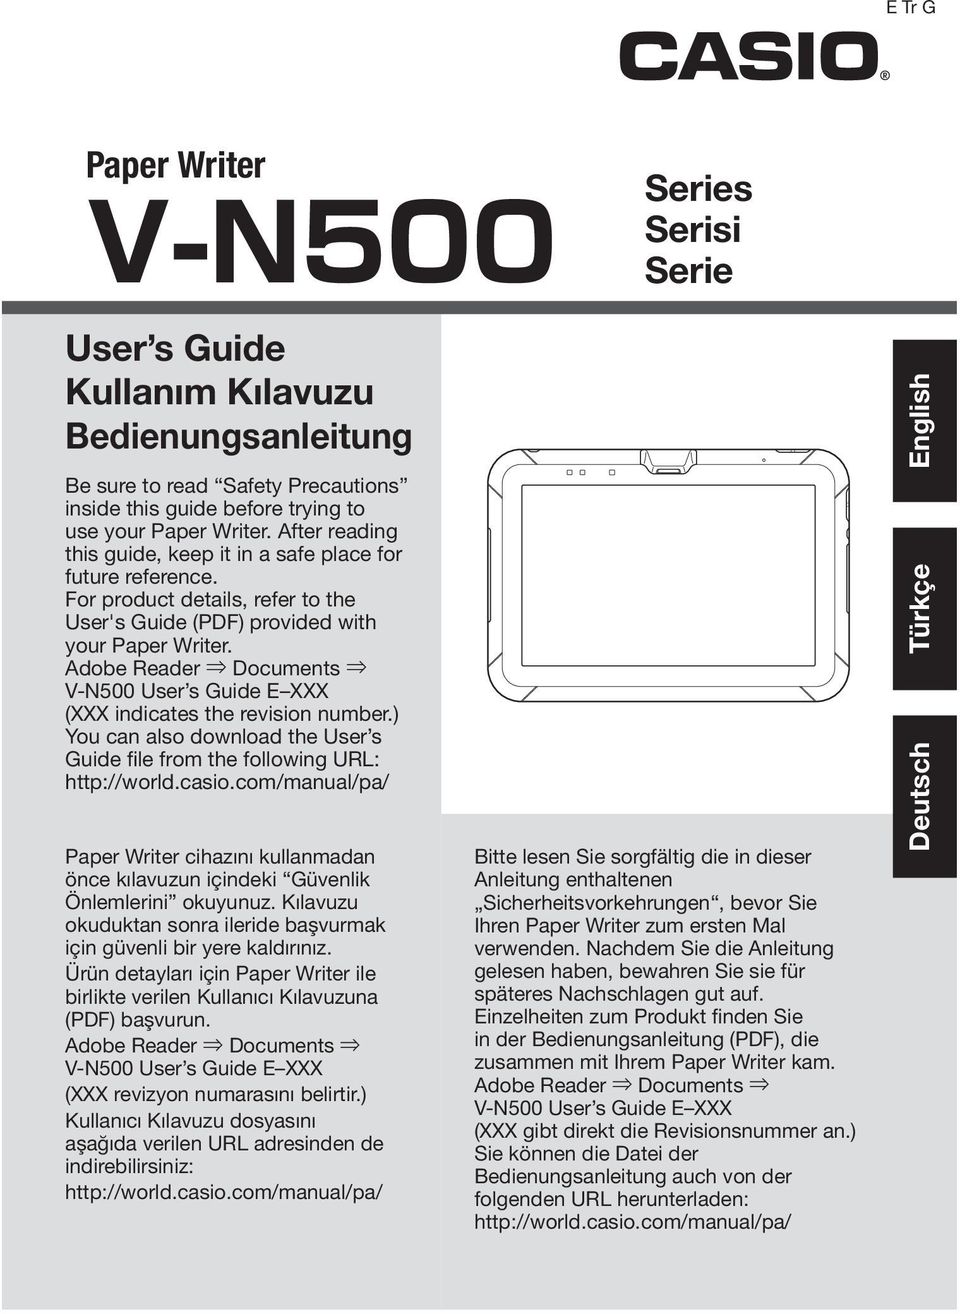 Adobe Reader Documents V-N500 User s Guide E XXX (XXX indicates the revision number.) You can also download the User s Guide file from the following URL: http://world.casio.